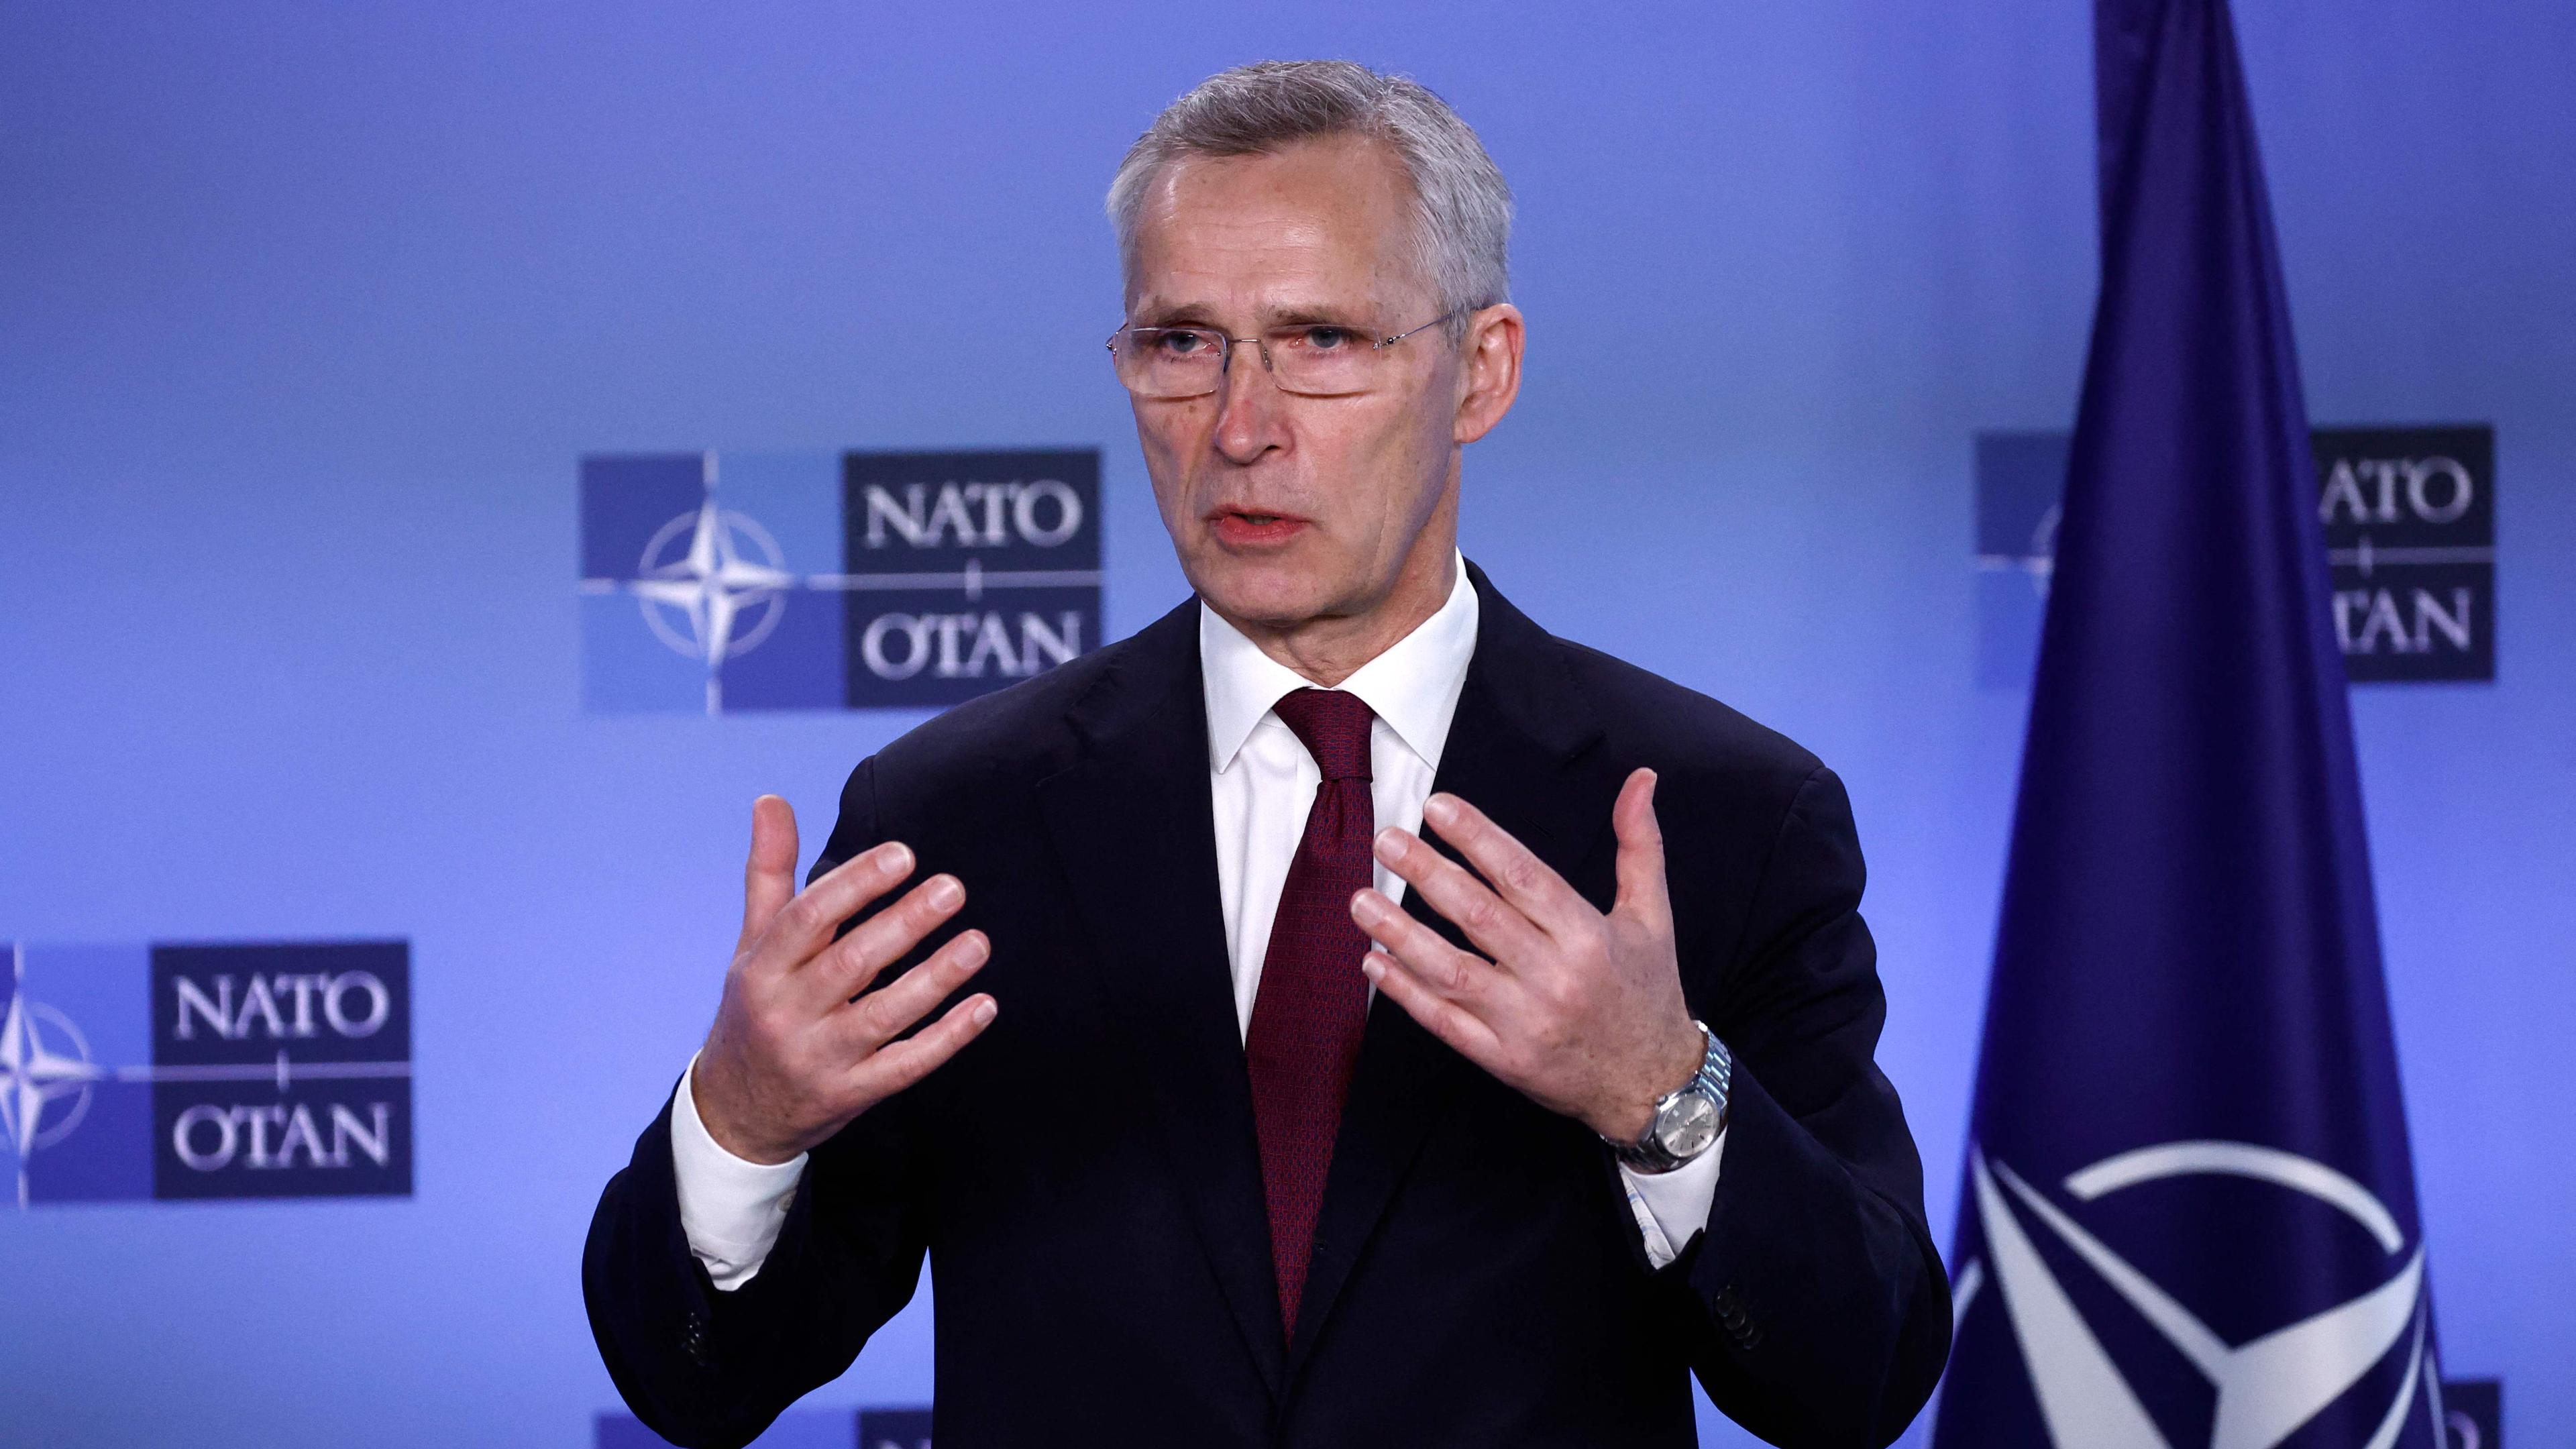 Jens Stoltenberg didn’t refer specifically to any Nato member in his comments, but the US and Germany have been among the countries reluctant to allow their weaponry to strike targets within Russia